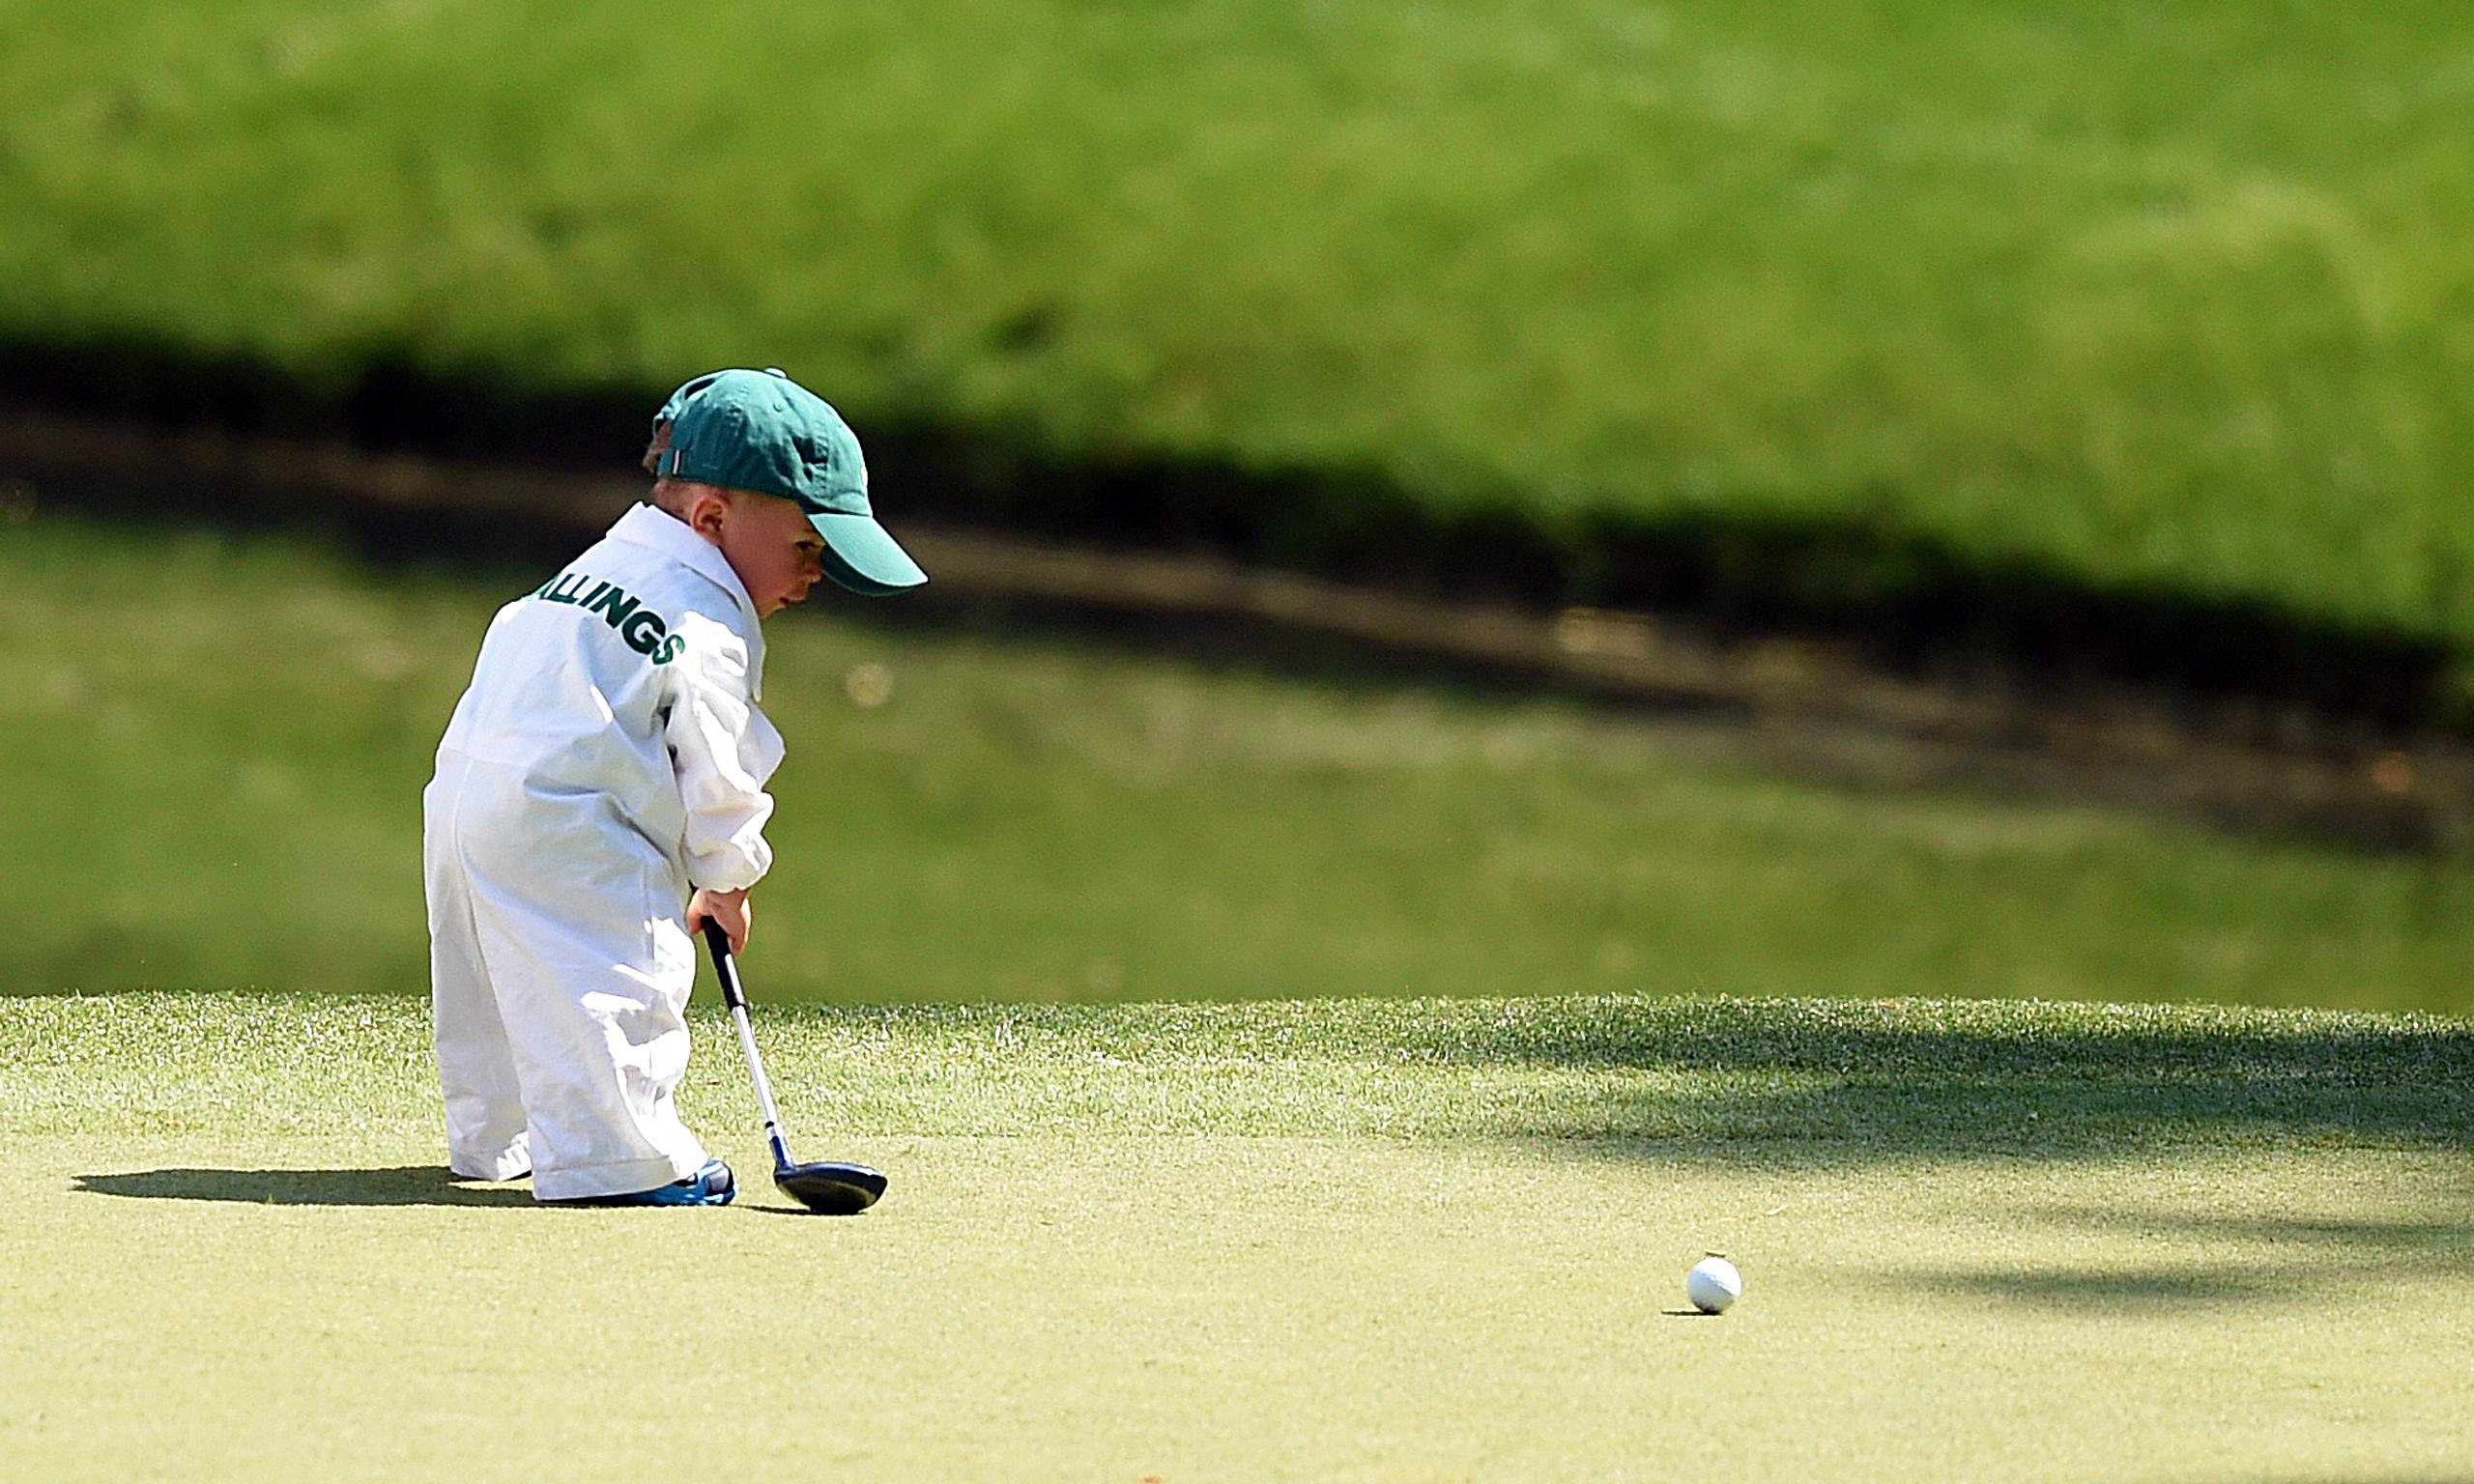 Sport picture of the day: like father like son - Golf news - NewsLocker.